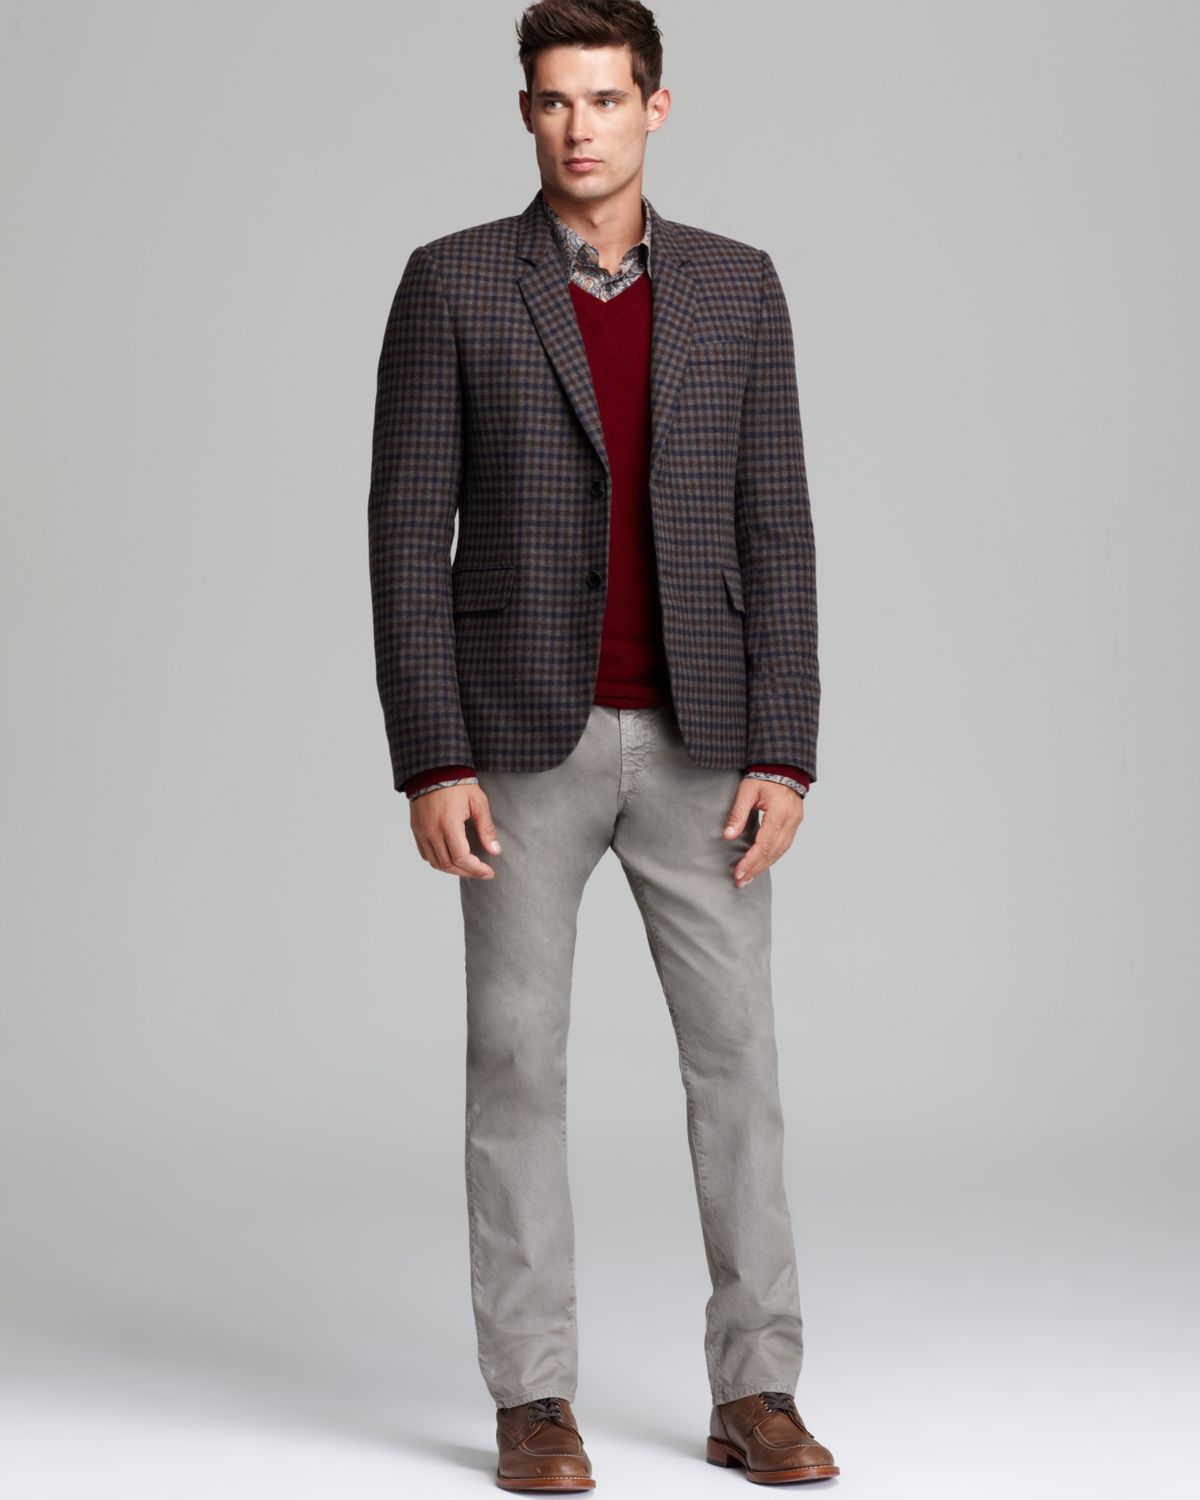 Lyst - Vince Soft Wool Check Blazer in Brown for Men